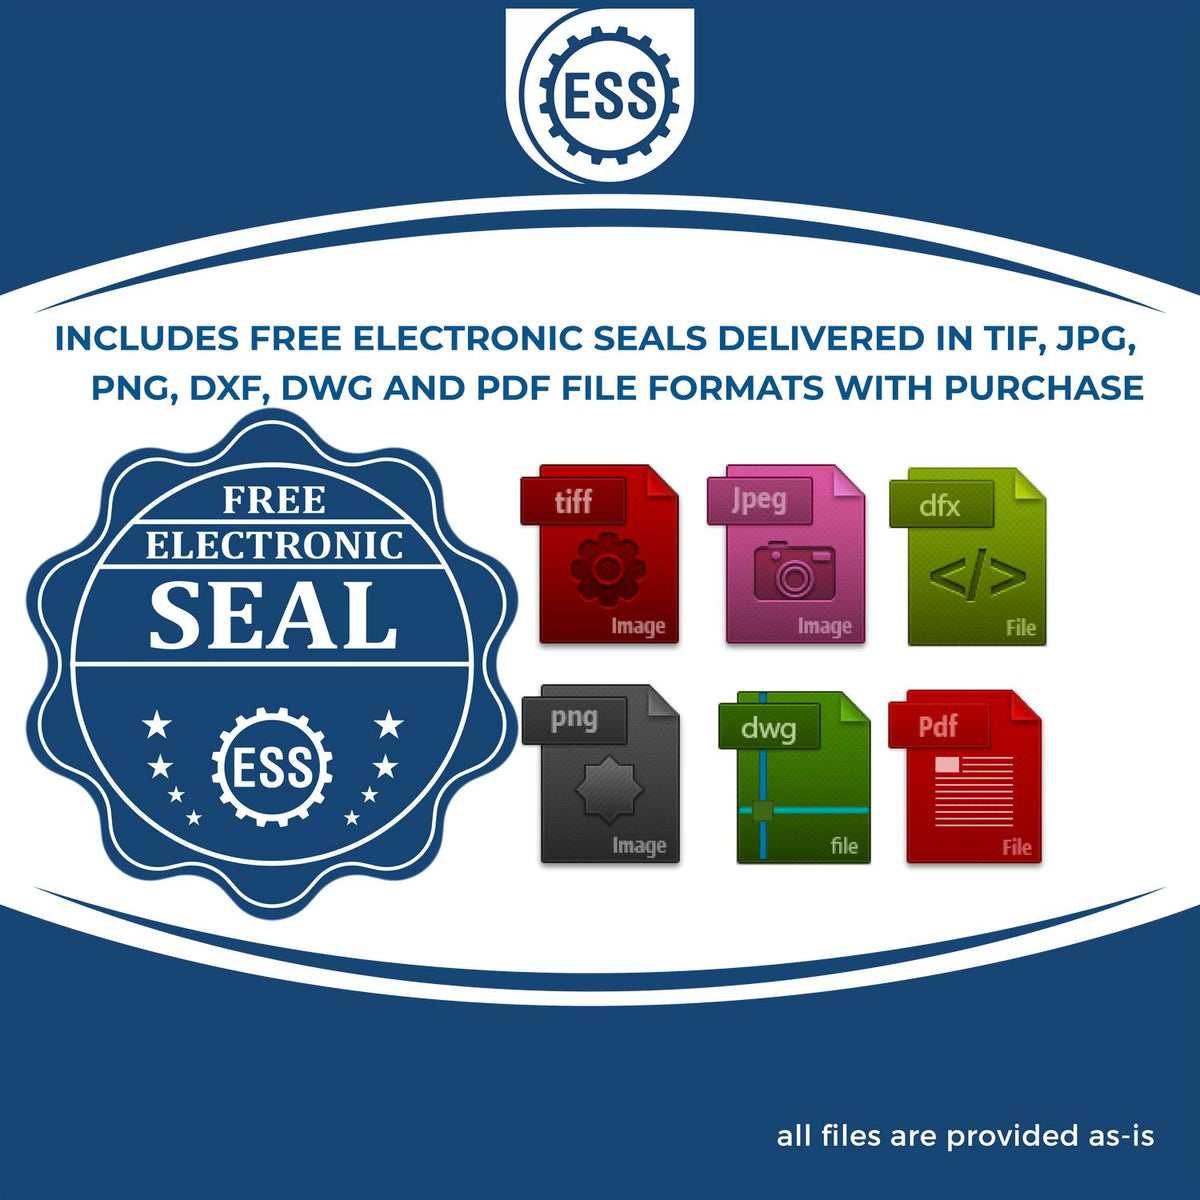 An infographic for the free electronic seal for the Gift Vermont Architect Seal illustrating the different file type icons such as DXF, DWG, TIF, JPG and PNG.